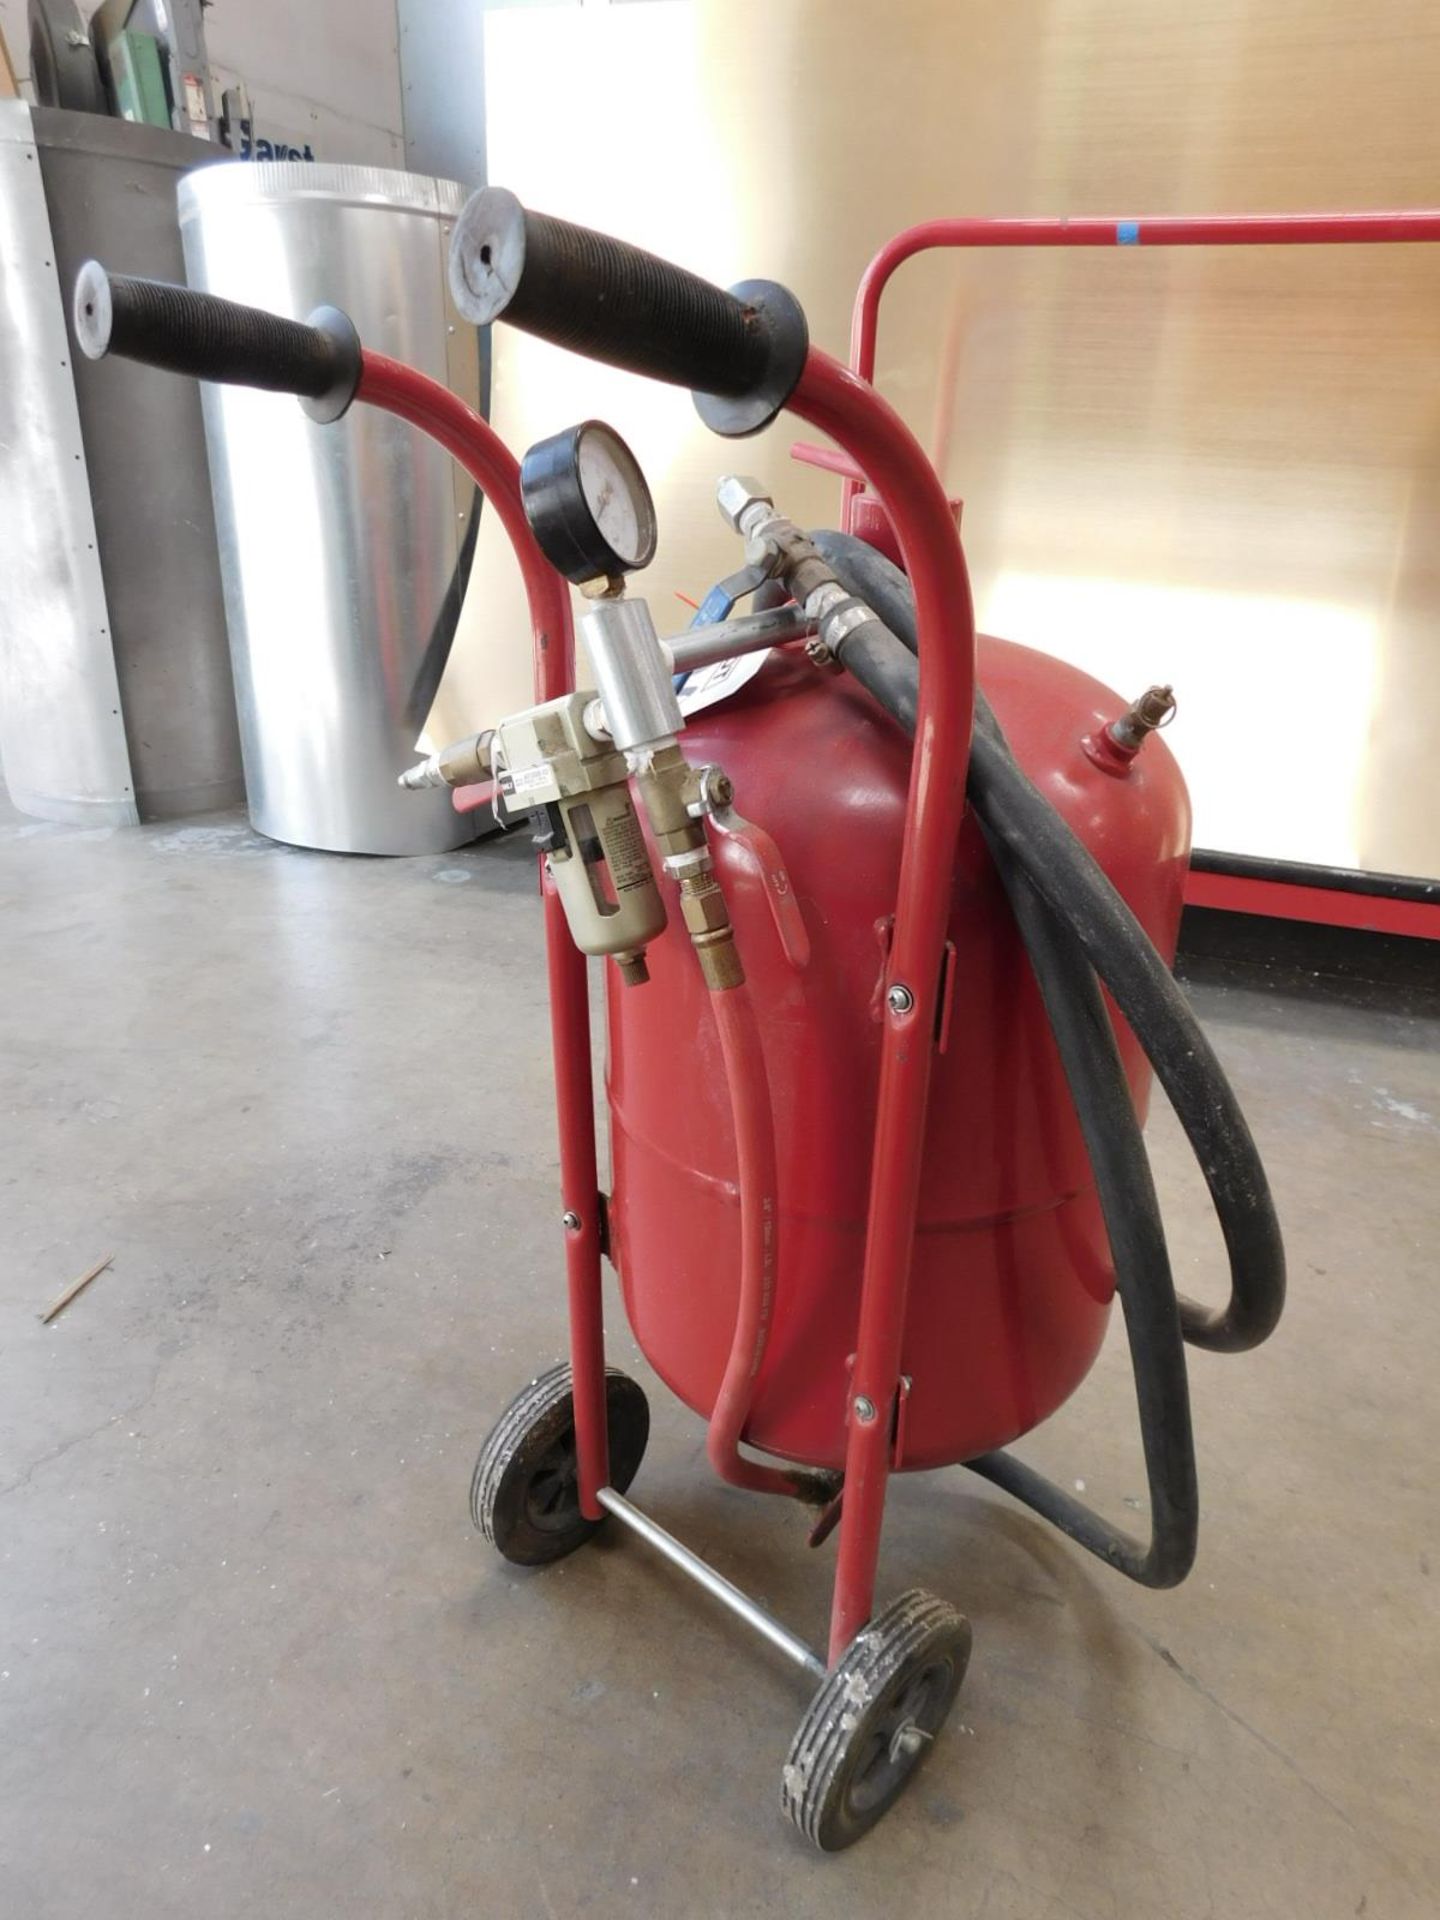 CENTRAL PNEUMATIC 40 LB ABRASIVE BLASTER, 60-125 PSI AIR PRESSURE, 6-25 CFM REQUIRED - Image 2 of 3